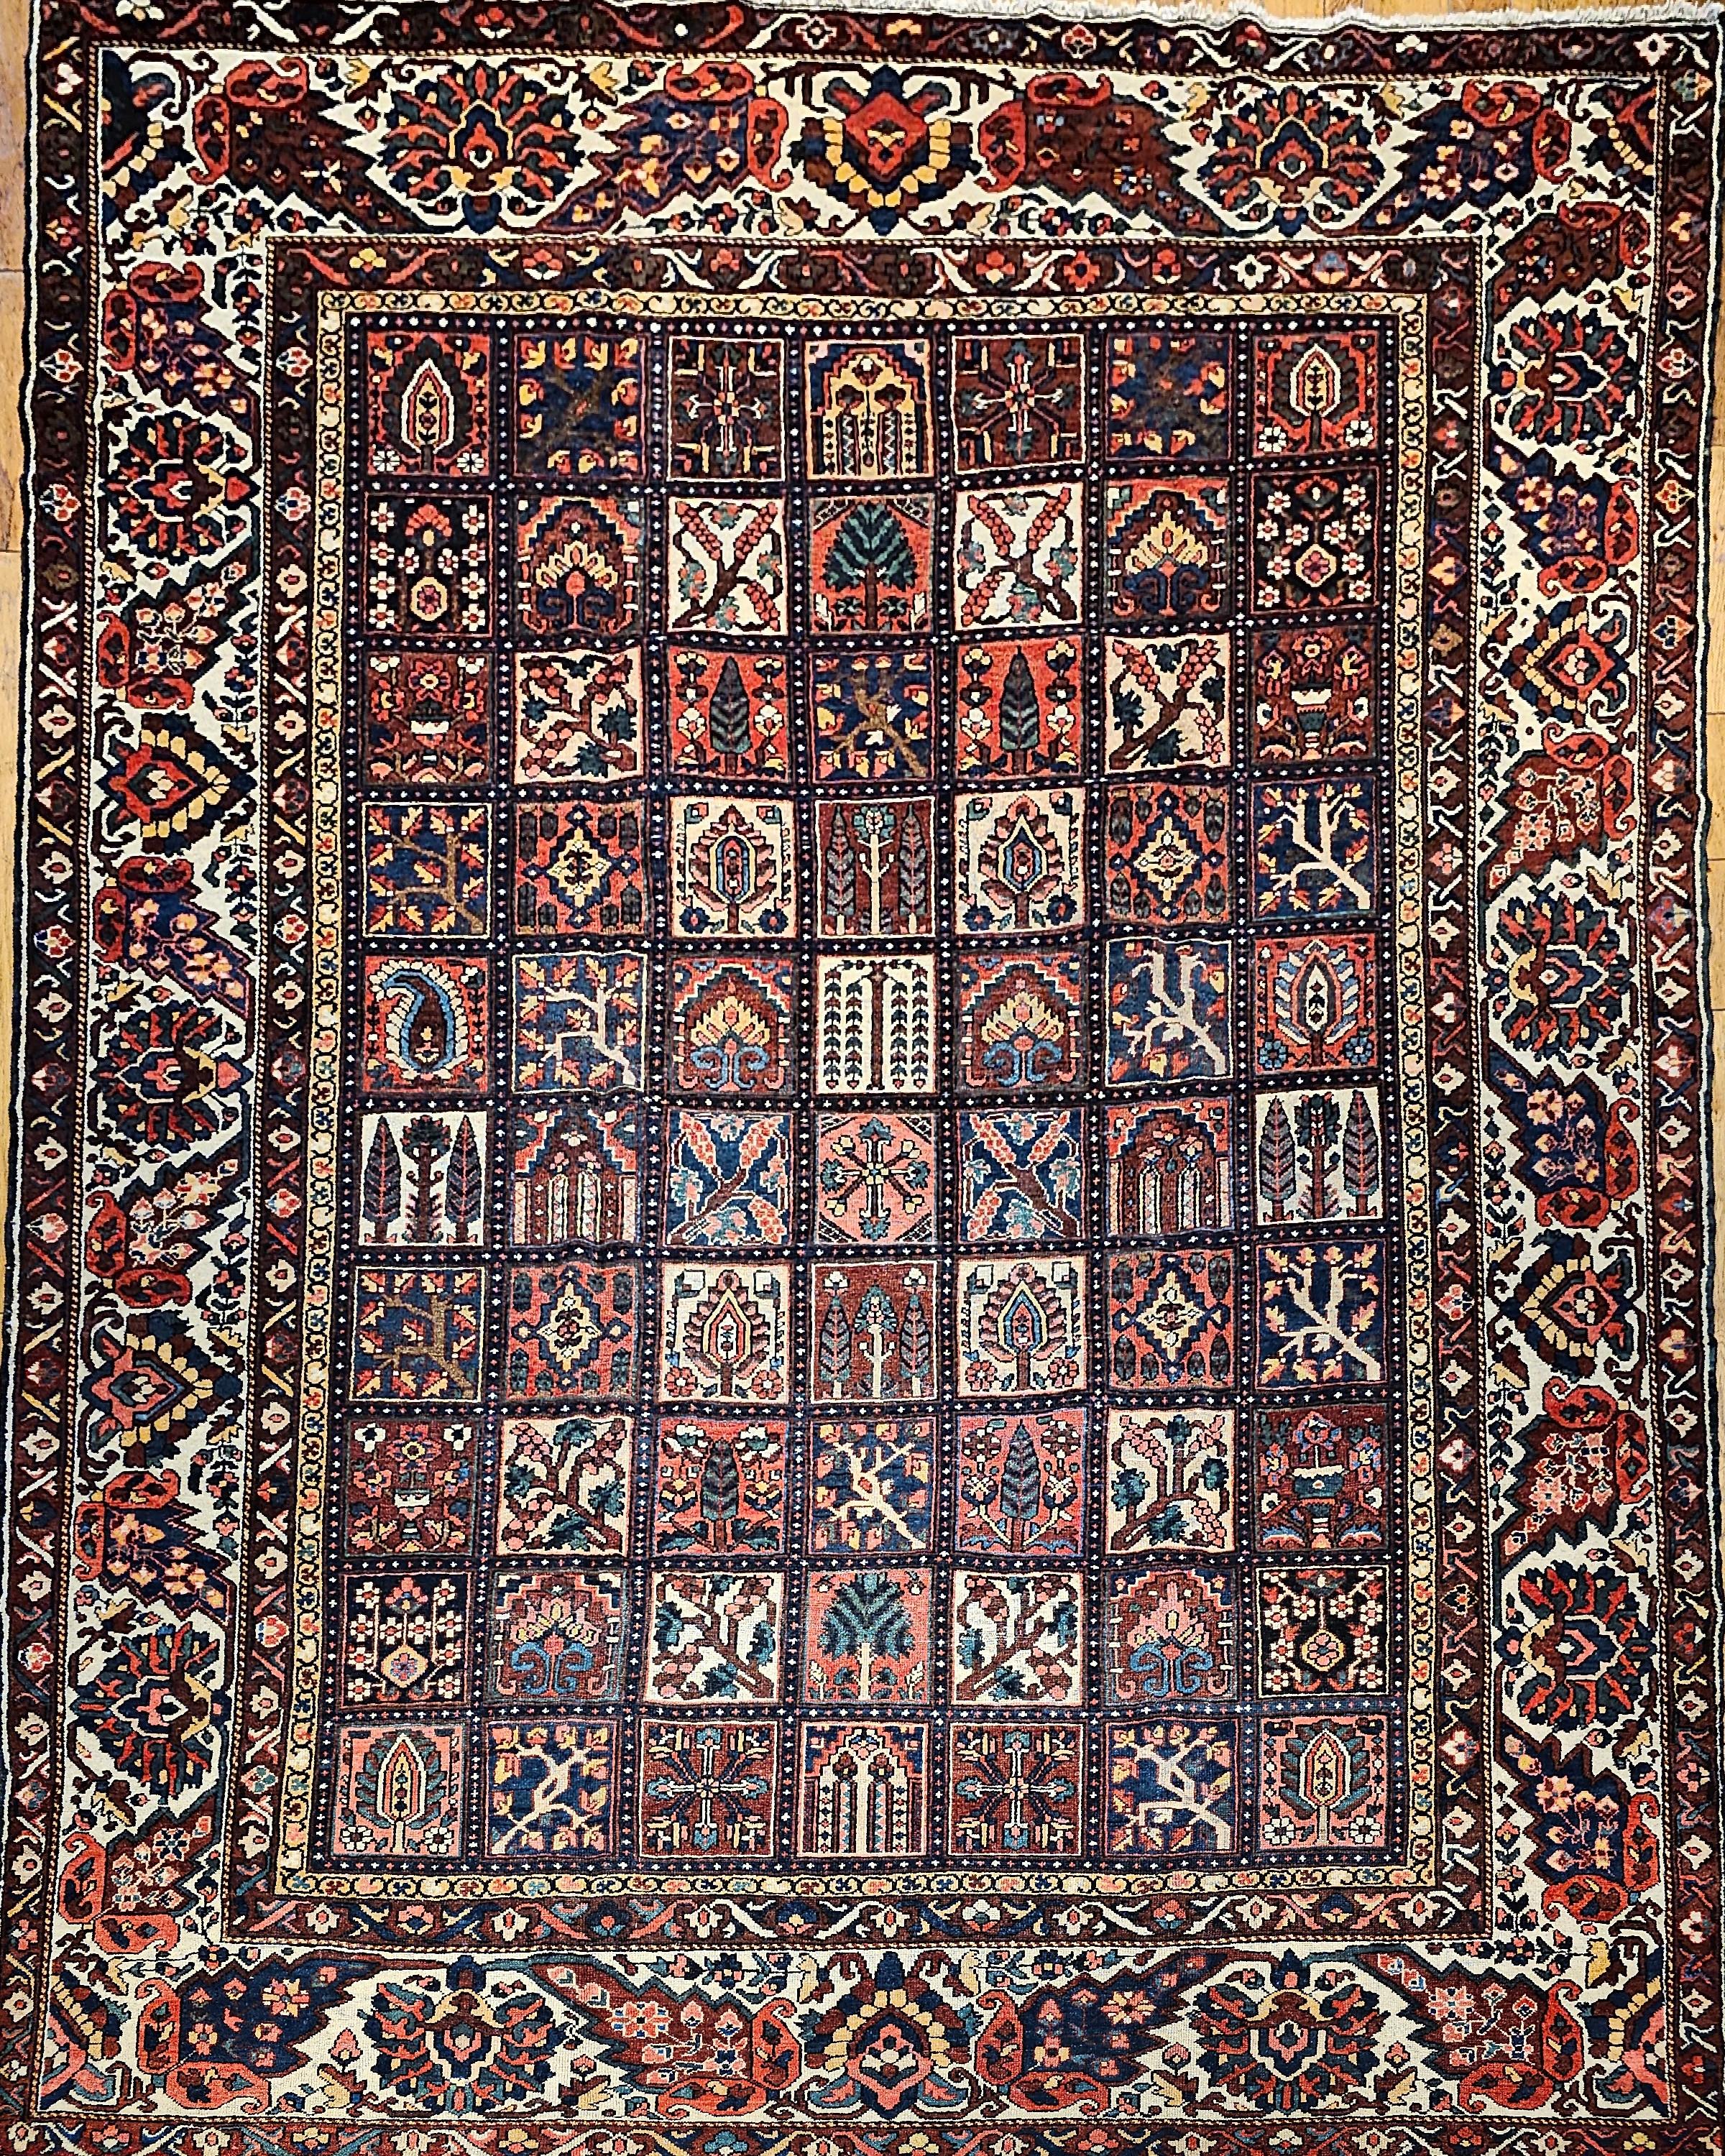  A beautiful “near square” vintage Persian Bakhtiari oversize  rug in garden panel design from the 2nd quarter of the 1900s in pale yellow, pink, French blue, and green. The design shows four panels of various flower design formats.   This is one of